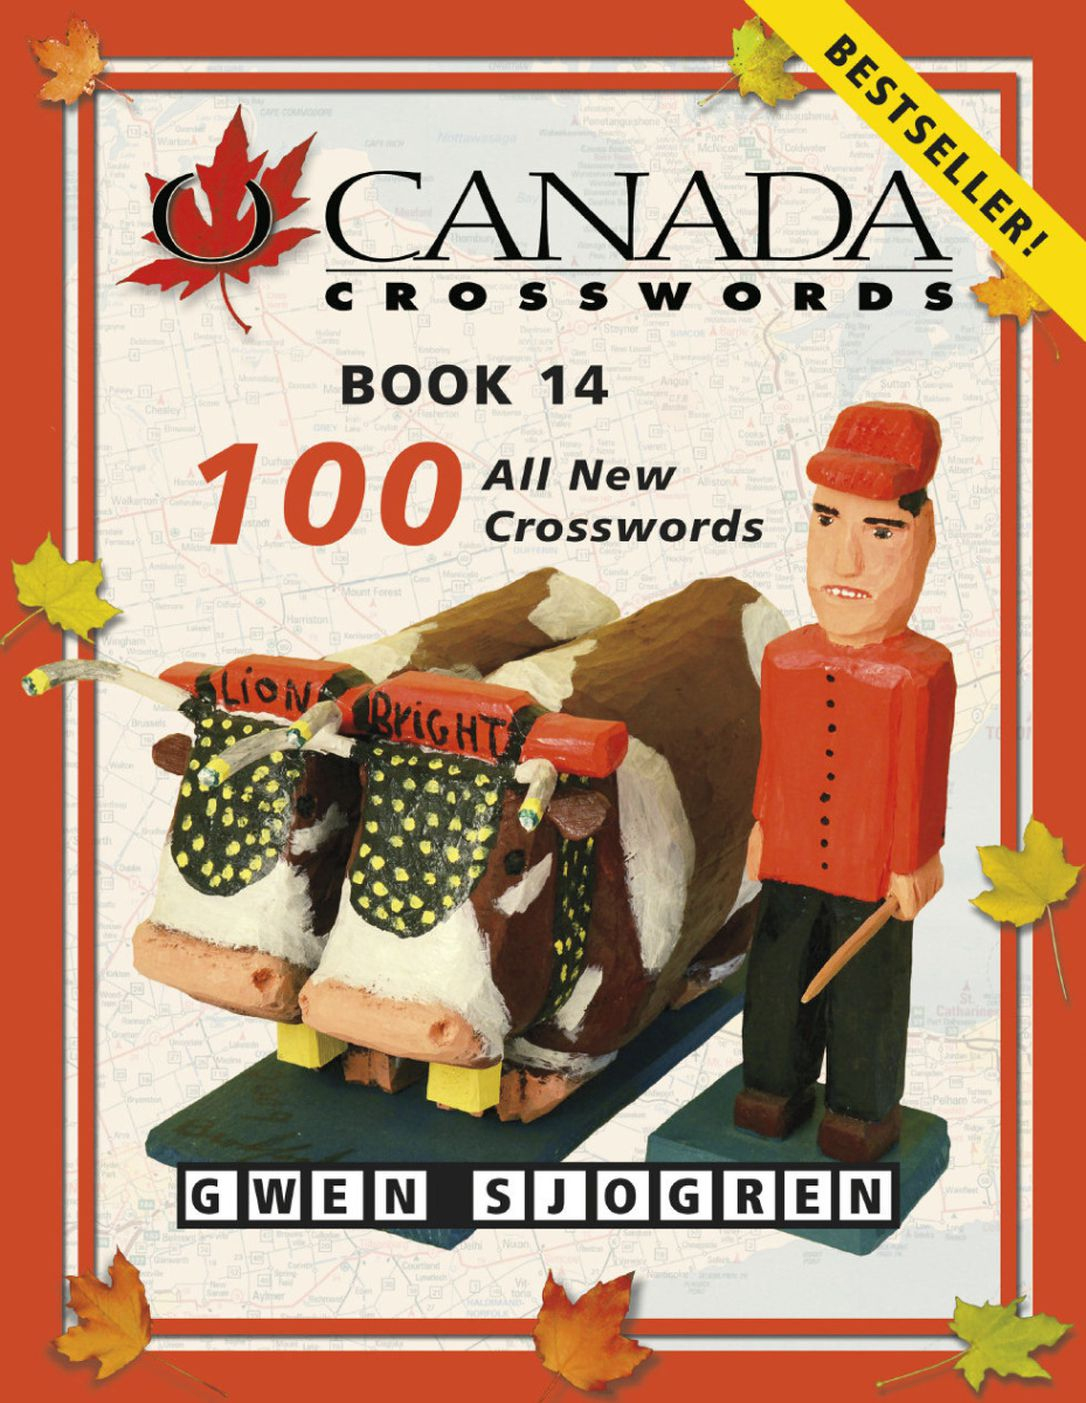 Canadiana Crosswords Compete With U.s. Puzzles | The Star - Printable Crossword Toronto Star